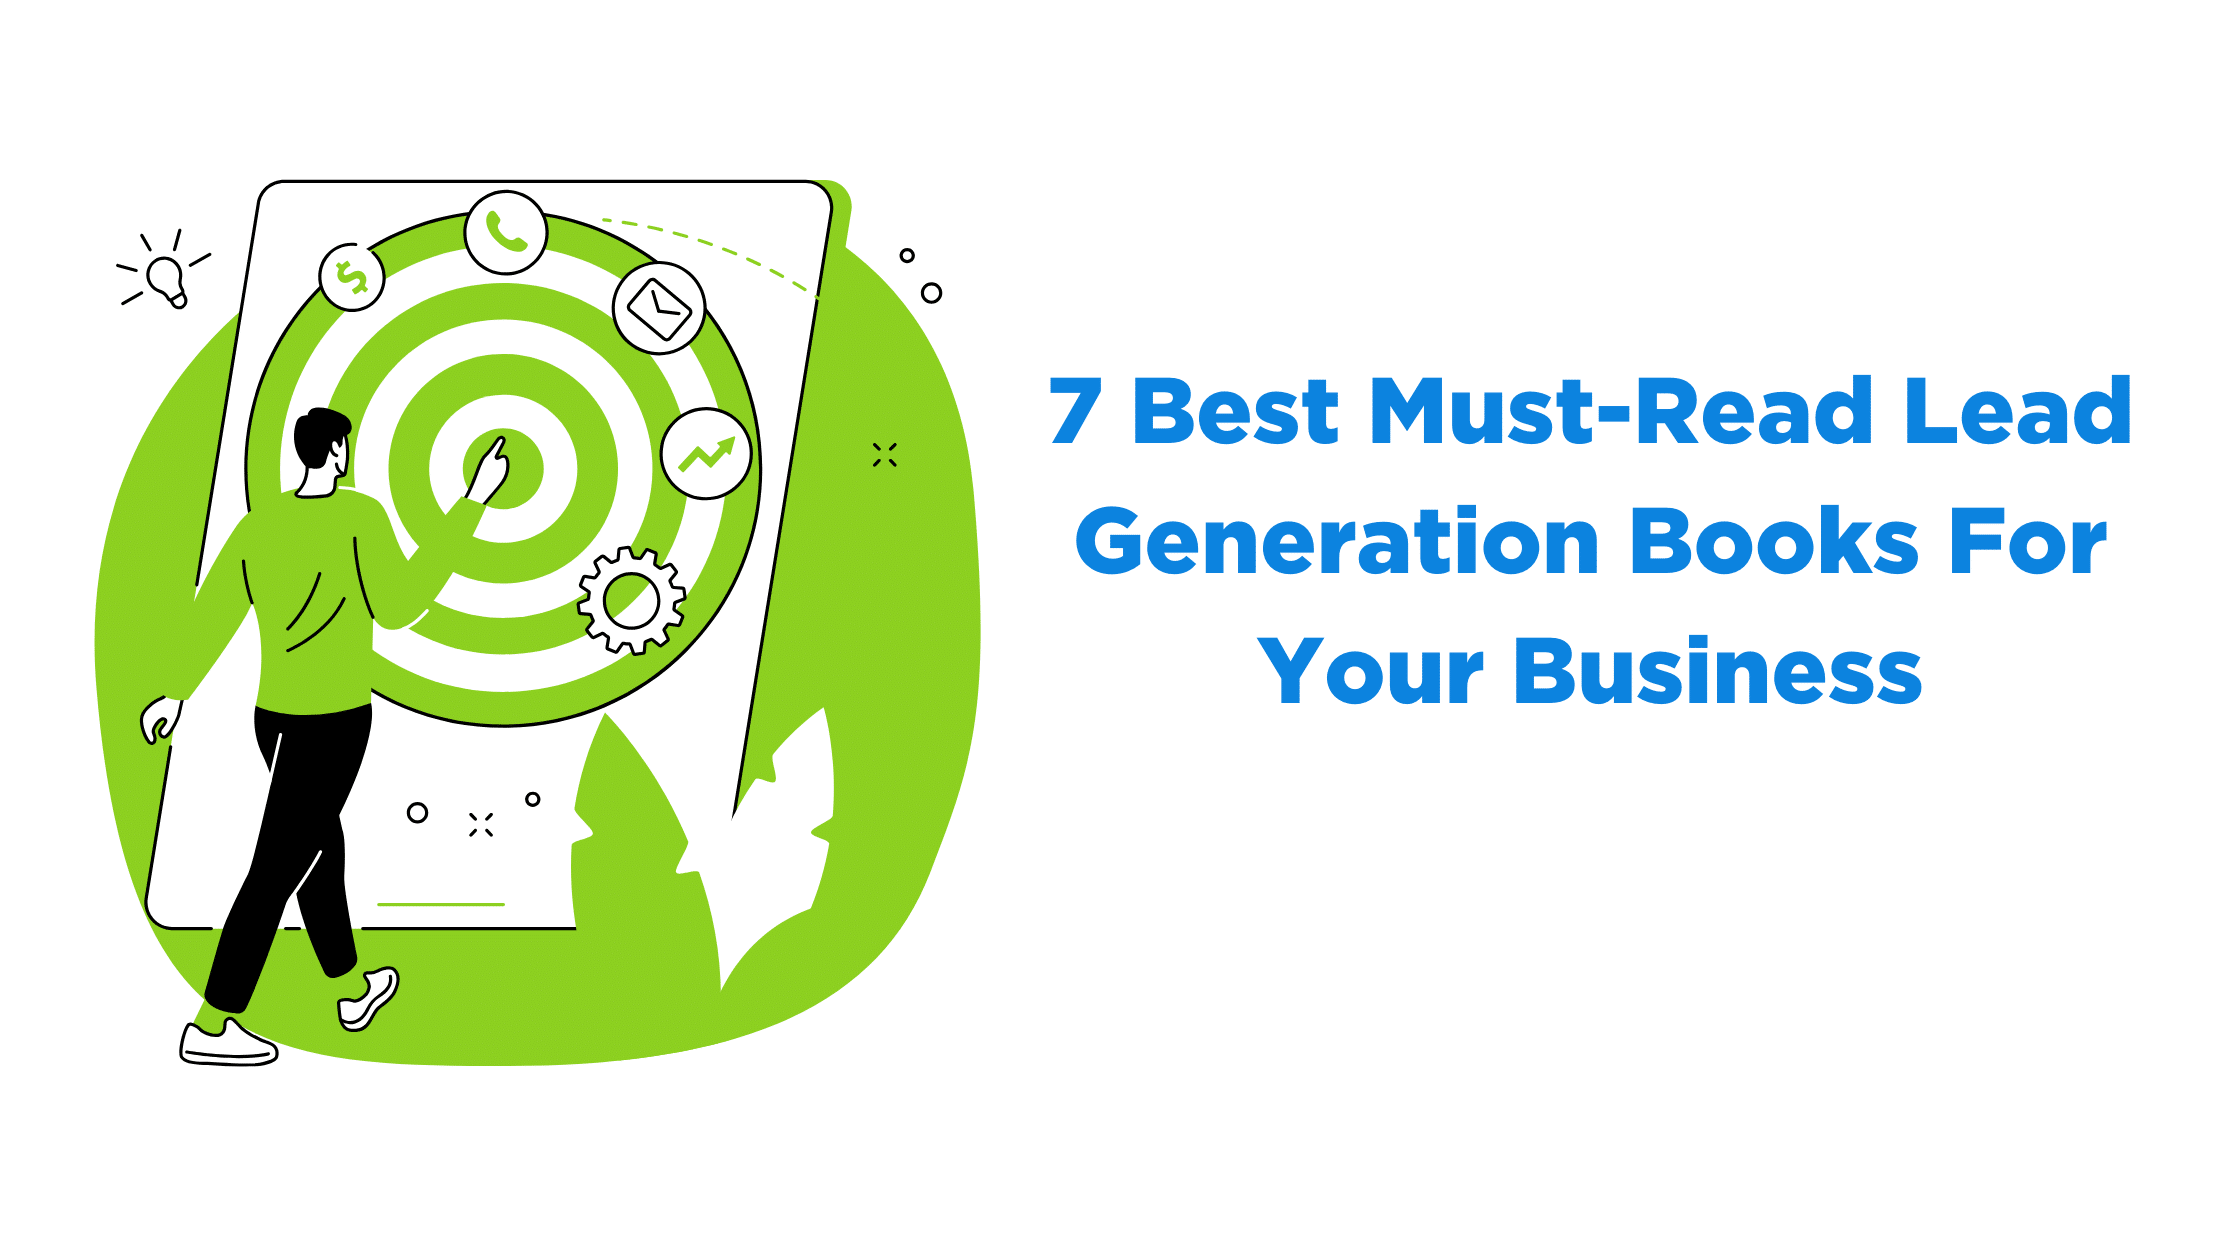 7 Best Must-Read Lead Generation Books For Your Business